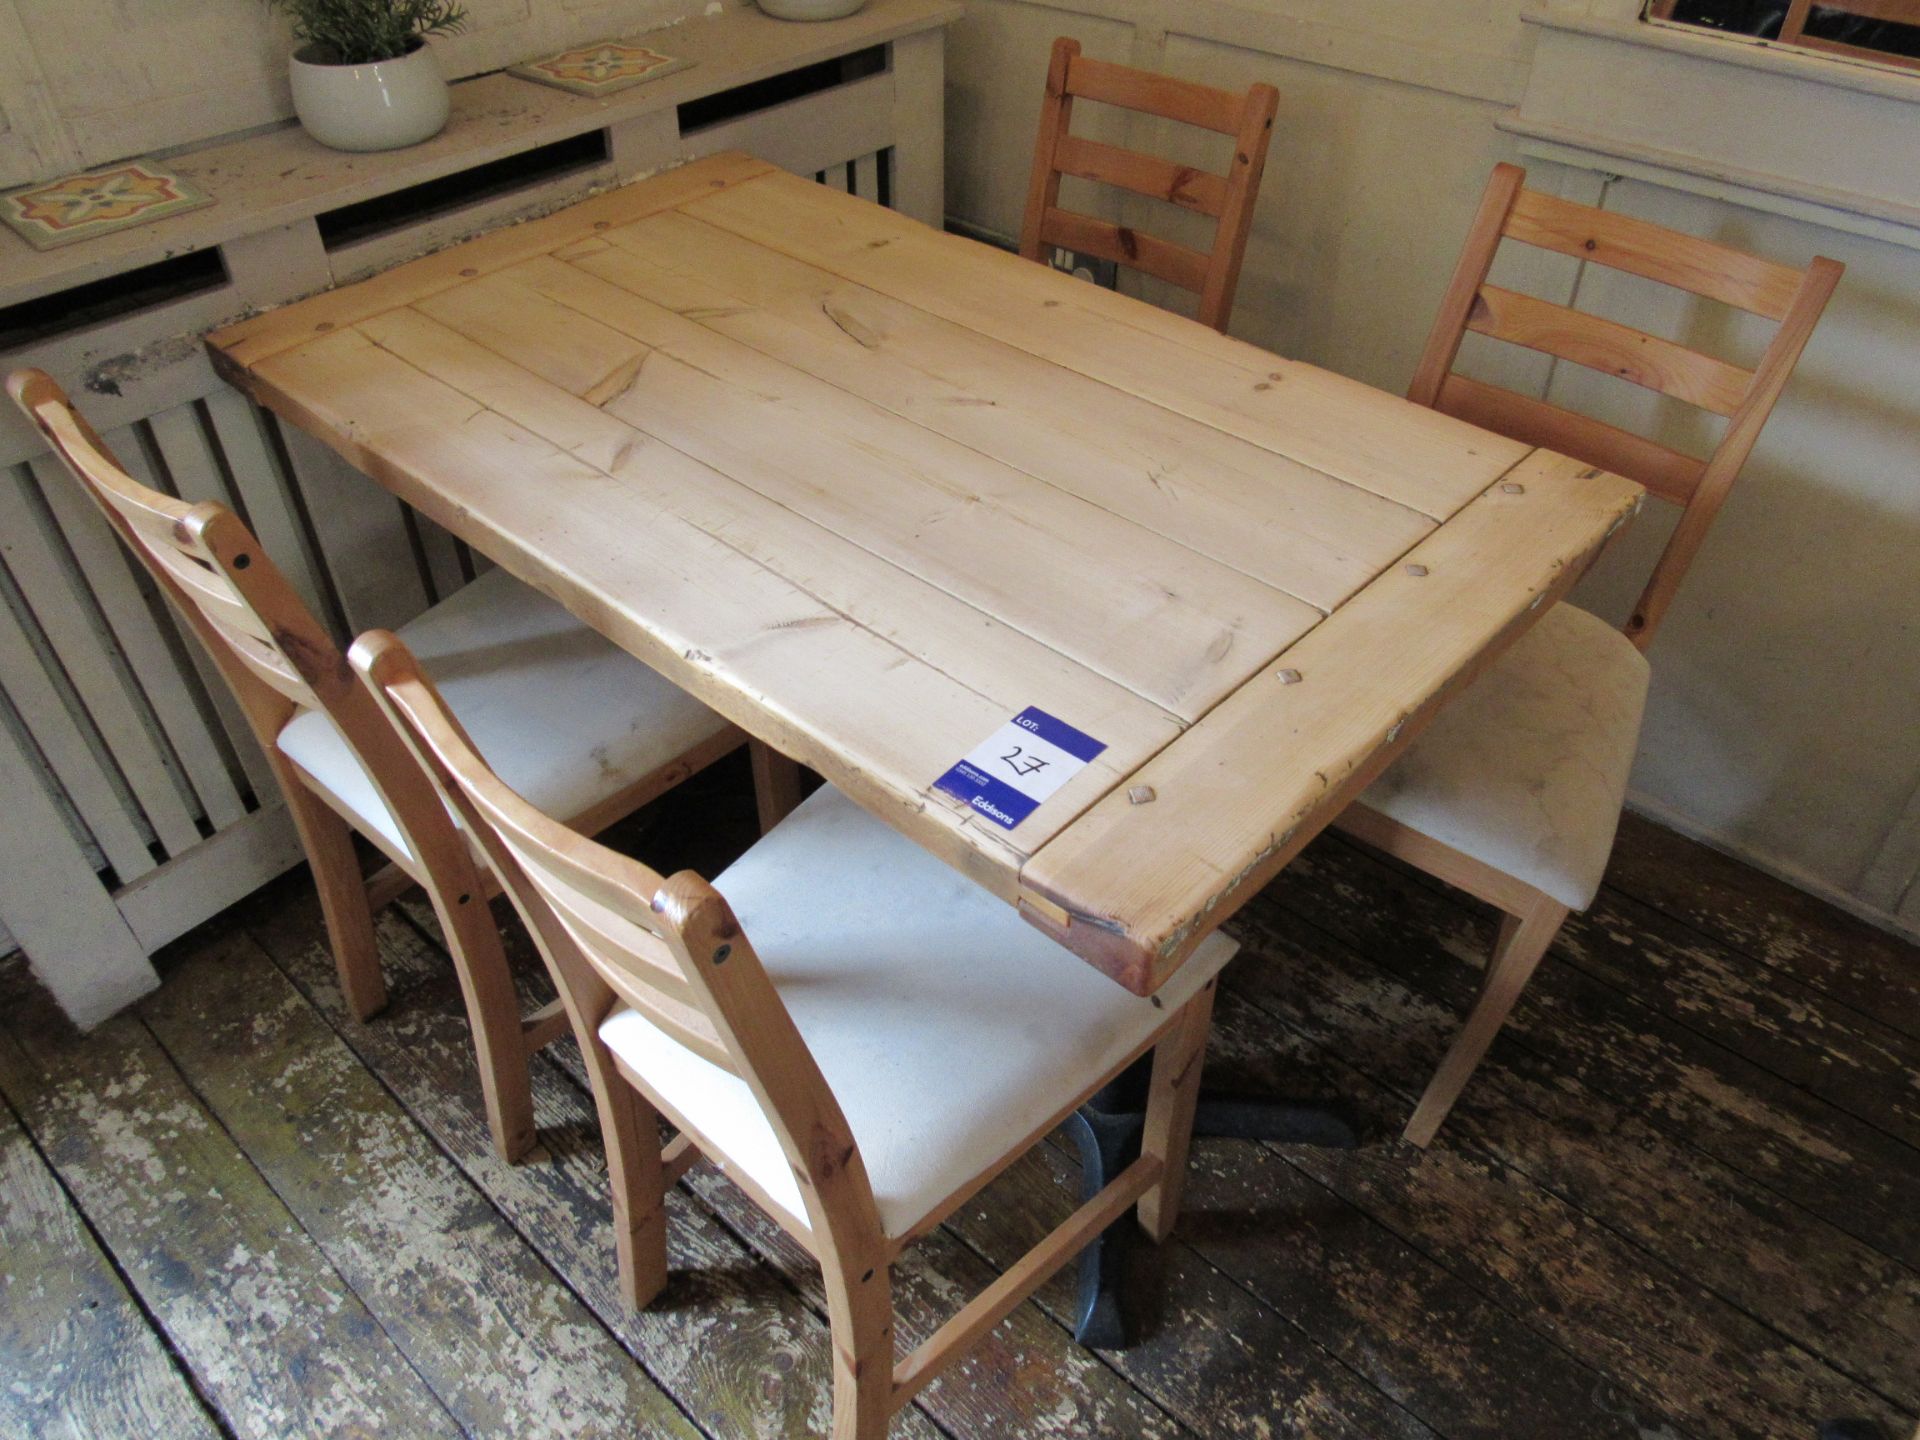 Rustic timber topped table with 4 chairs